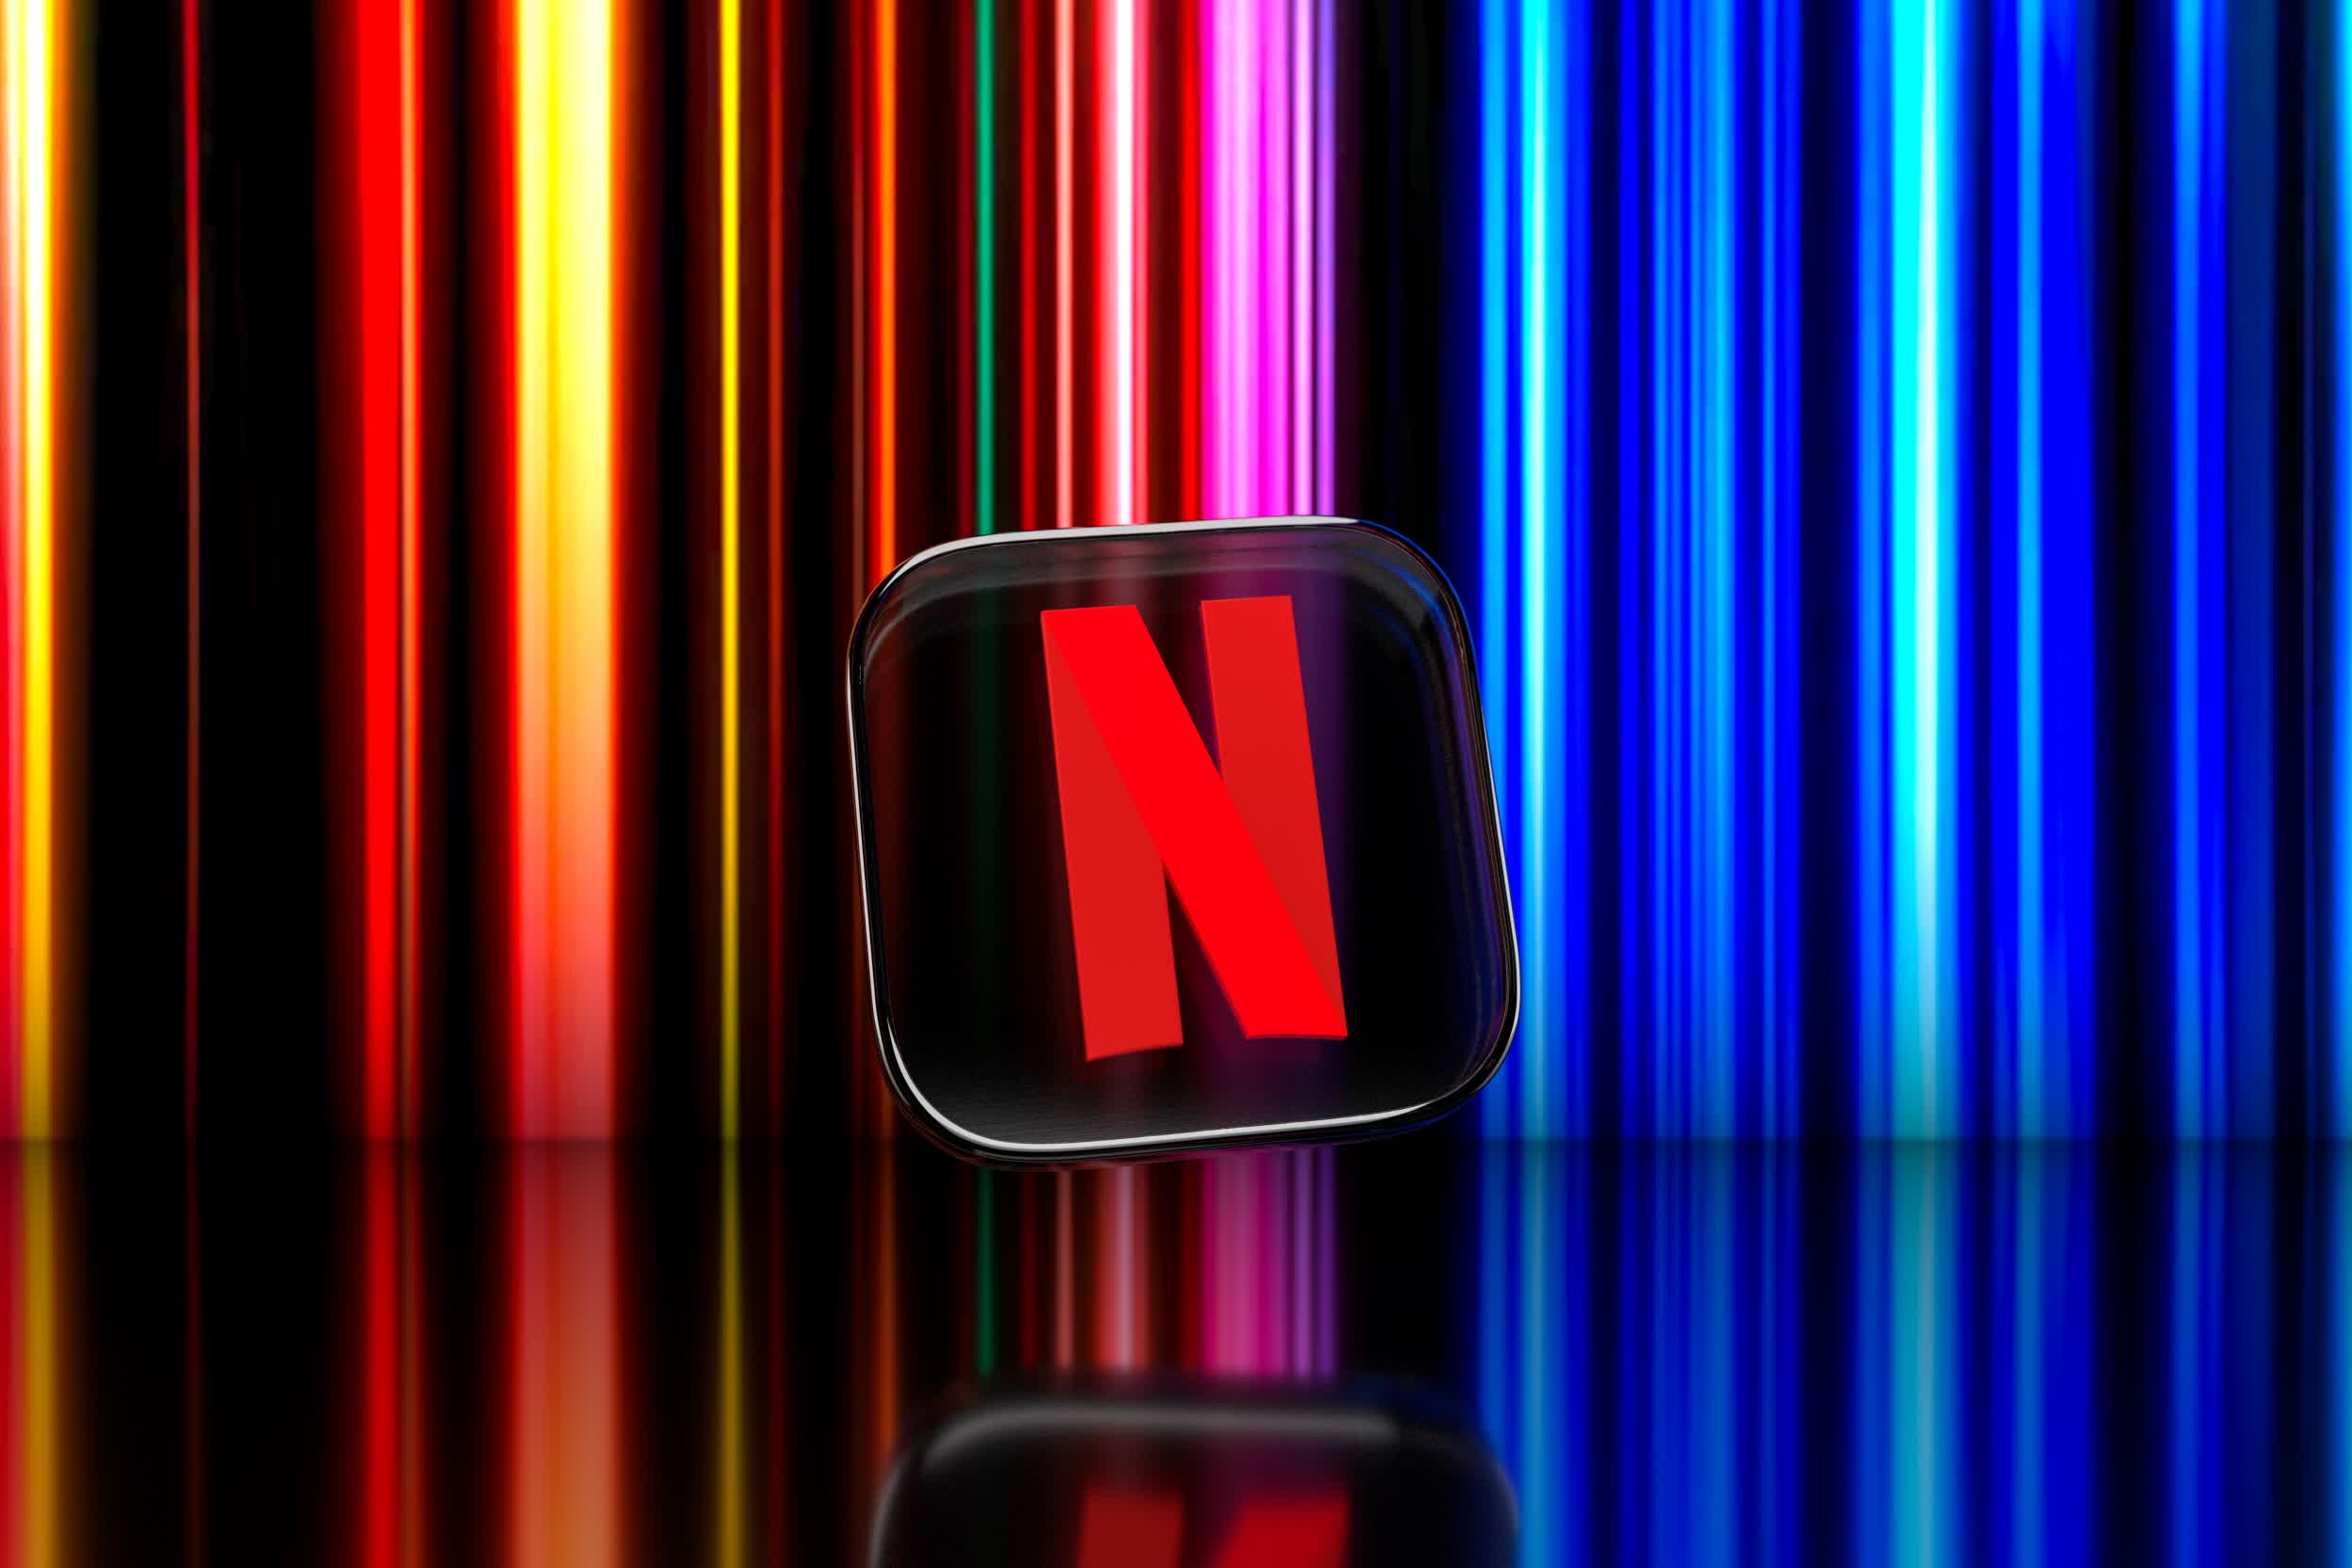 Netflix backtracks on ad-supported tiers, says it is now open to cheaper subscriptions